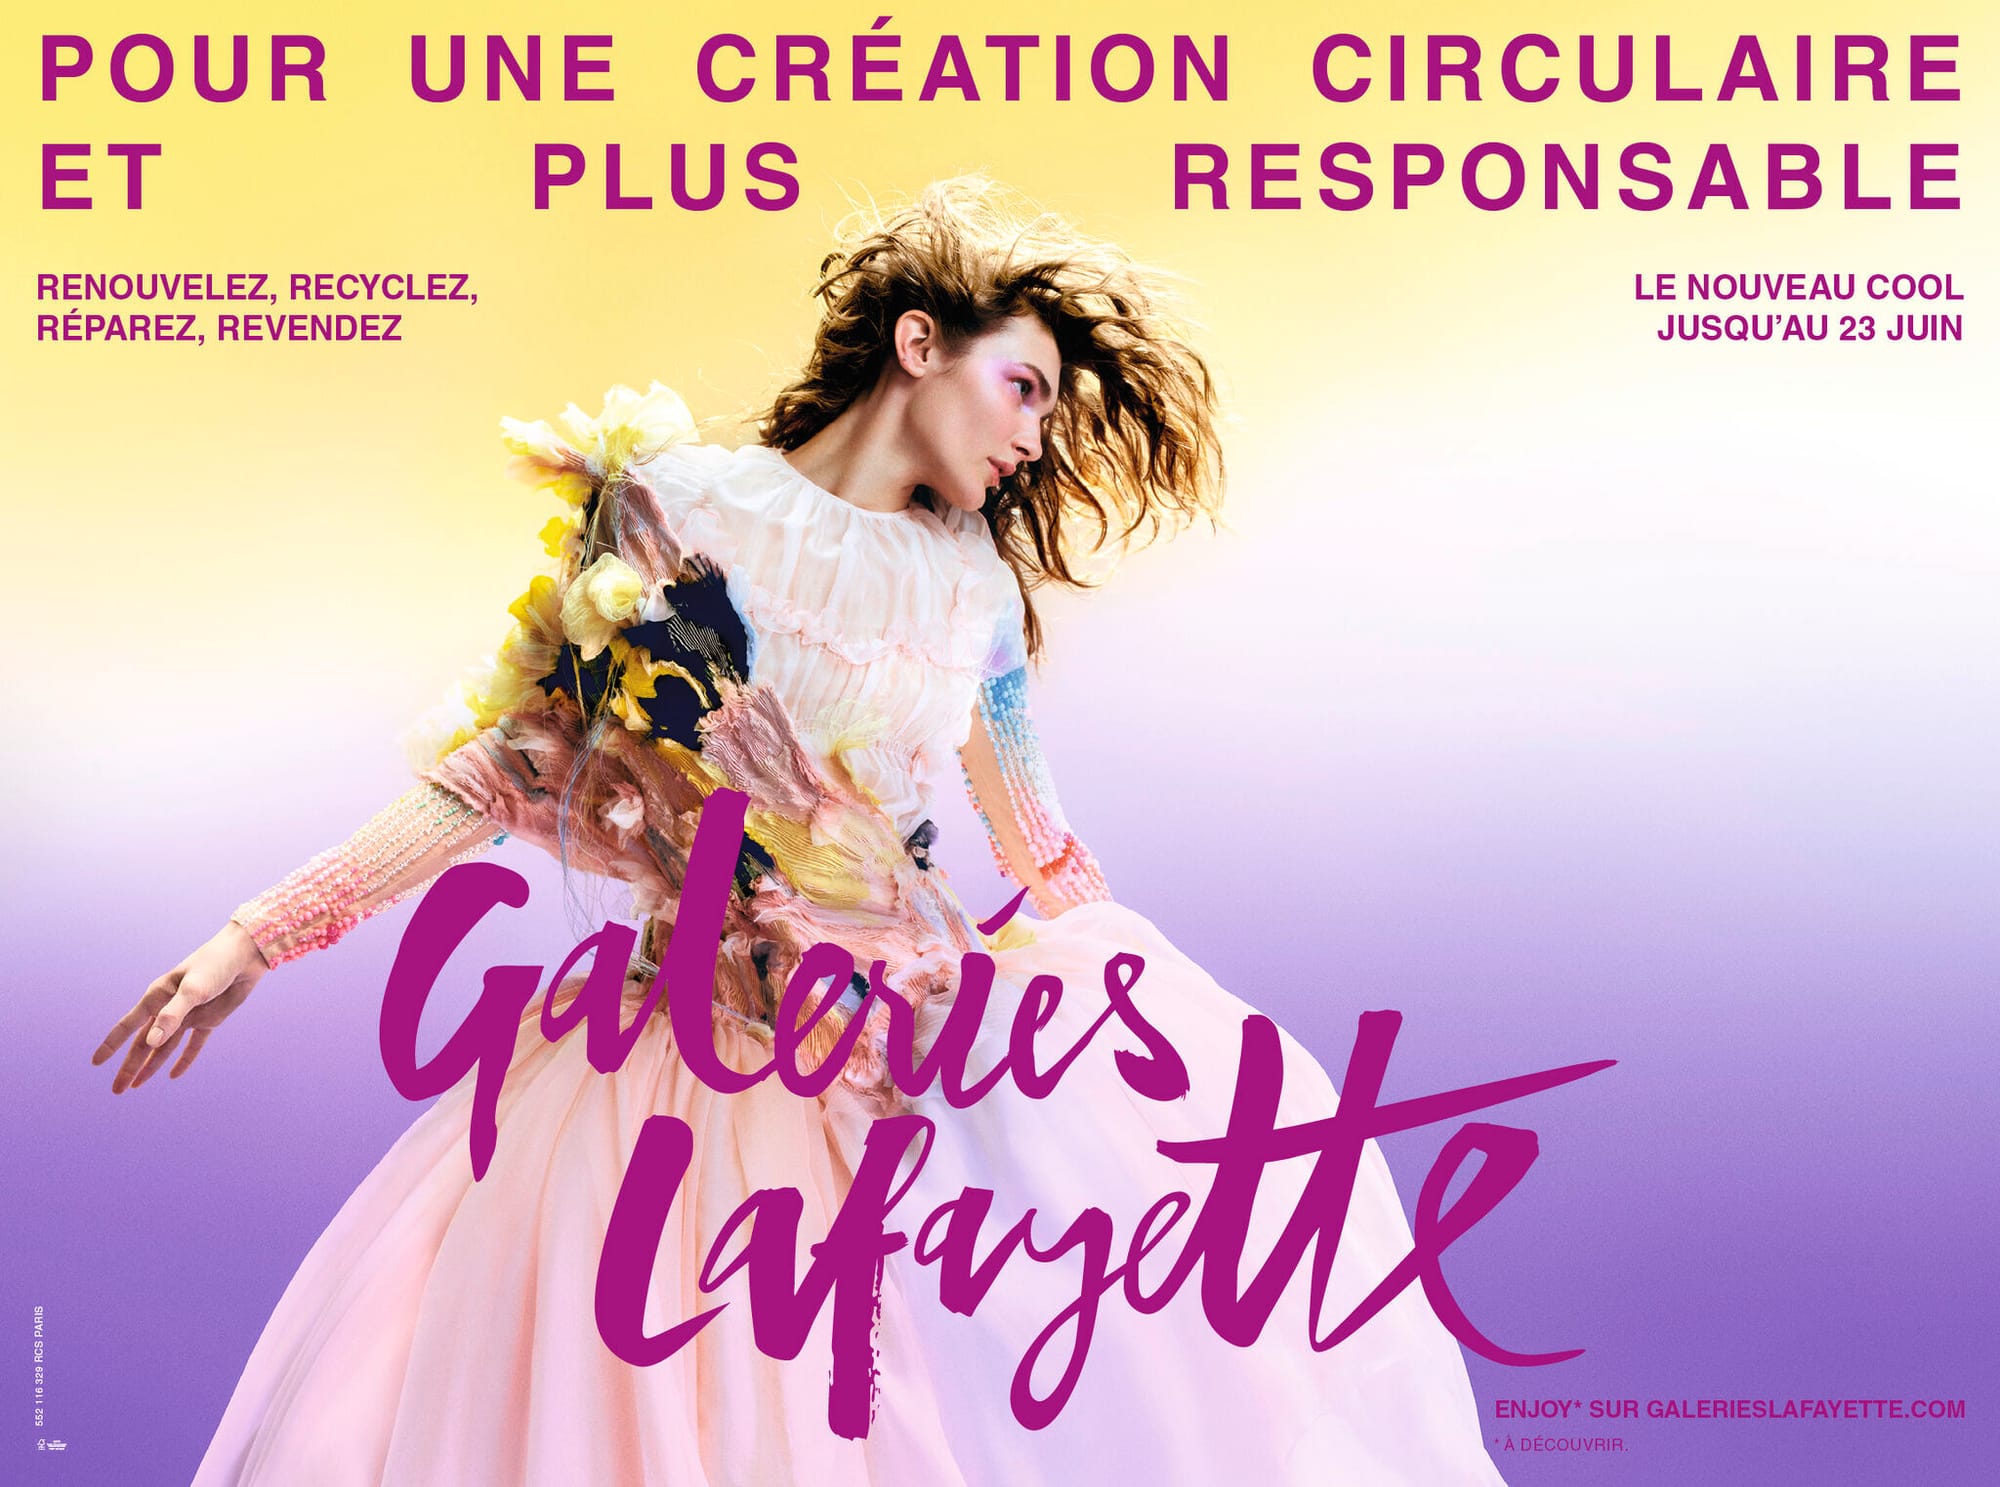 Redefining cool in fashion: Galeries Lafayette's take on circularity and creativity